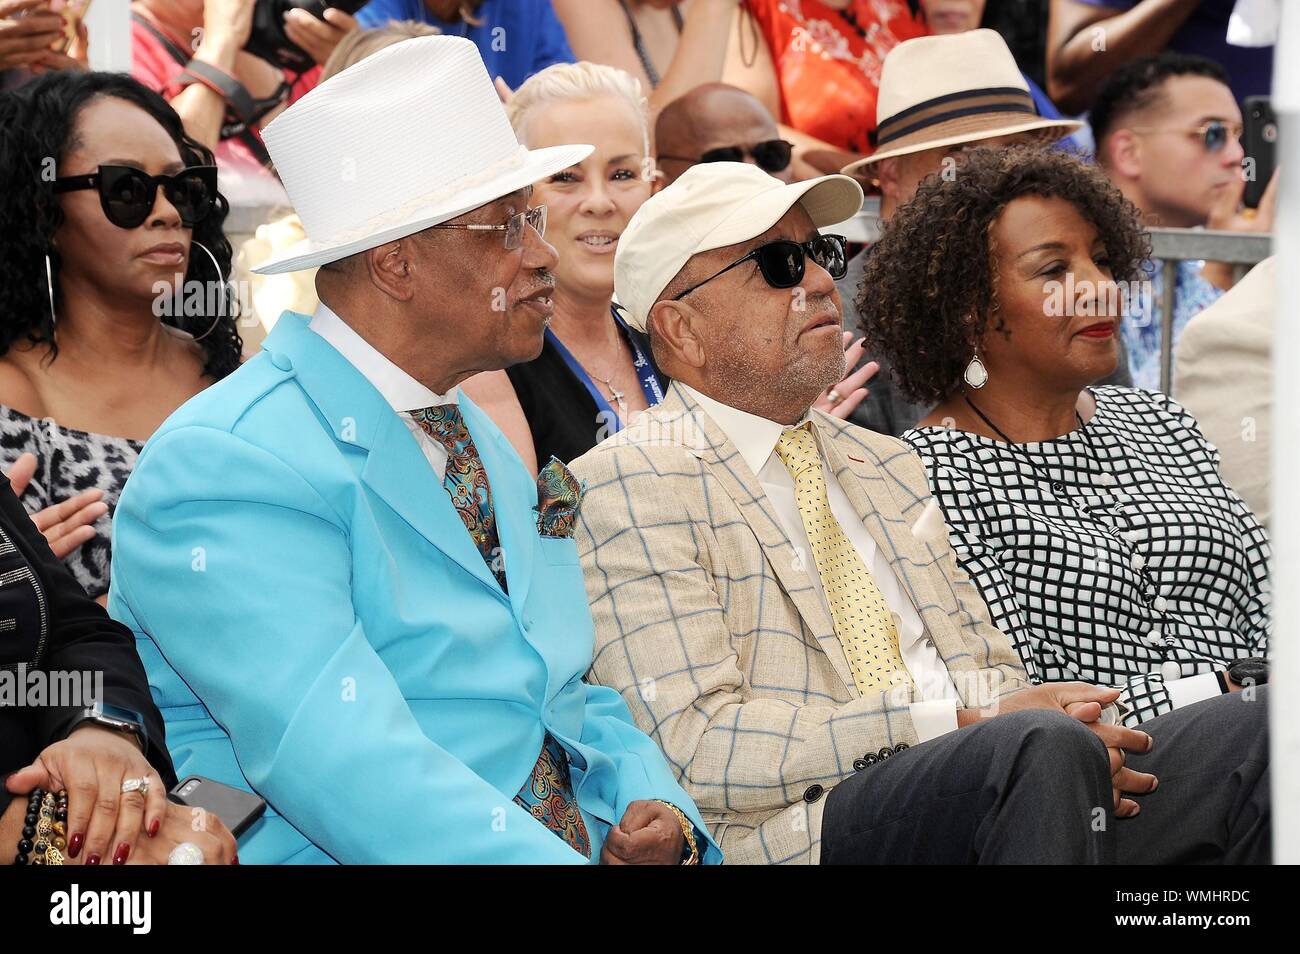 Los Angeles, CA. 4th Sep, 2019. Marshall Thompson, Berry Gordy Jr. at the induction ceremony for Posthumous Star on the Hollywood Walk of Fame for Jackie Wilson, Hollywood Boulevard, Los Angeles, CA September 4, 2019. Credit: Michael Germana/Everett Collection/Alamy Live News Stock Photo